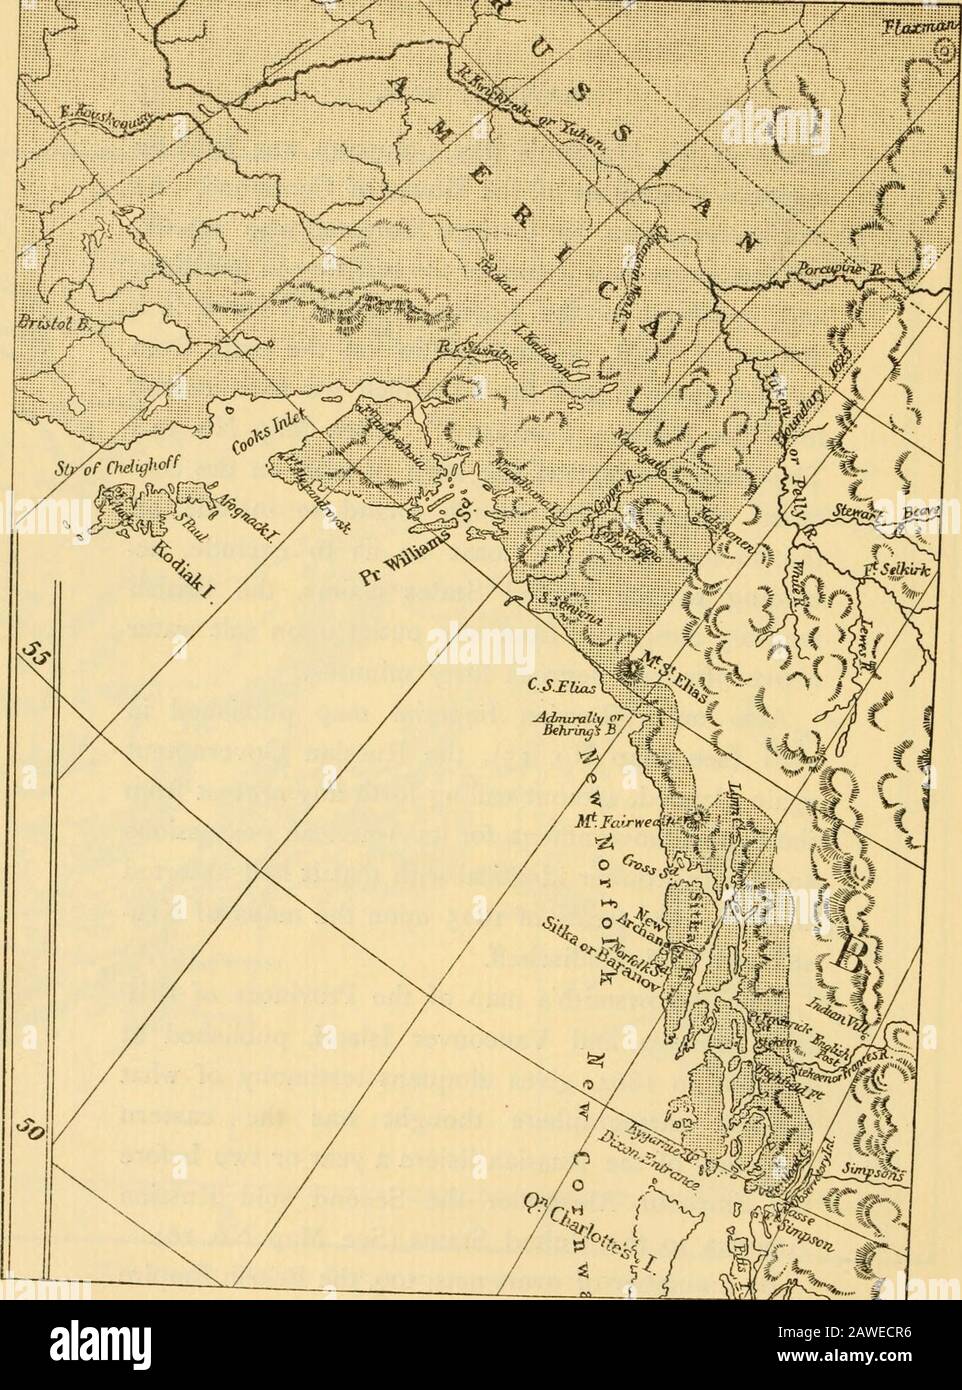 The Alaska frontier . This map shows that the strip of land on the con-tinent extended far enough inland to include allthe sinuosities of the coast so as to exclude, ac-cording to the United States claims, the Britishterritory altogether from any outlet upon salt waterabove fifty-four degrees forty minutes. Also on a Russian Imperial map published in1861 (see Map No. 15), the Russian Governmentagain claimed, without calling forth any protest fromthe British Government, for its American possessionsan eastern frontier identical with that it had assertedsoon after the treaty of 1825 upon the maps Stock Photo